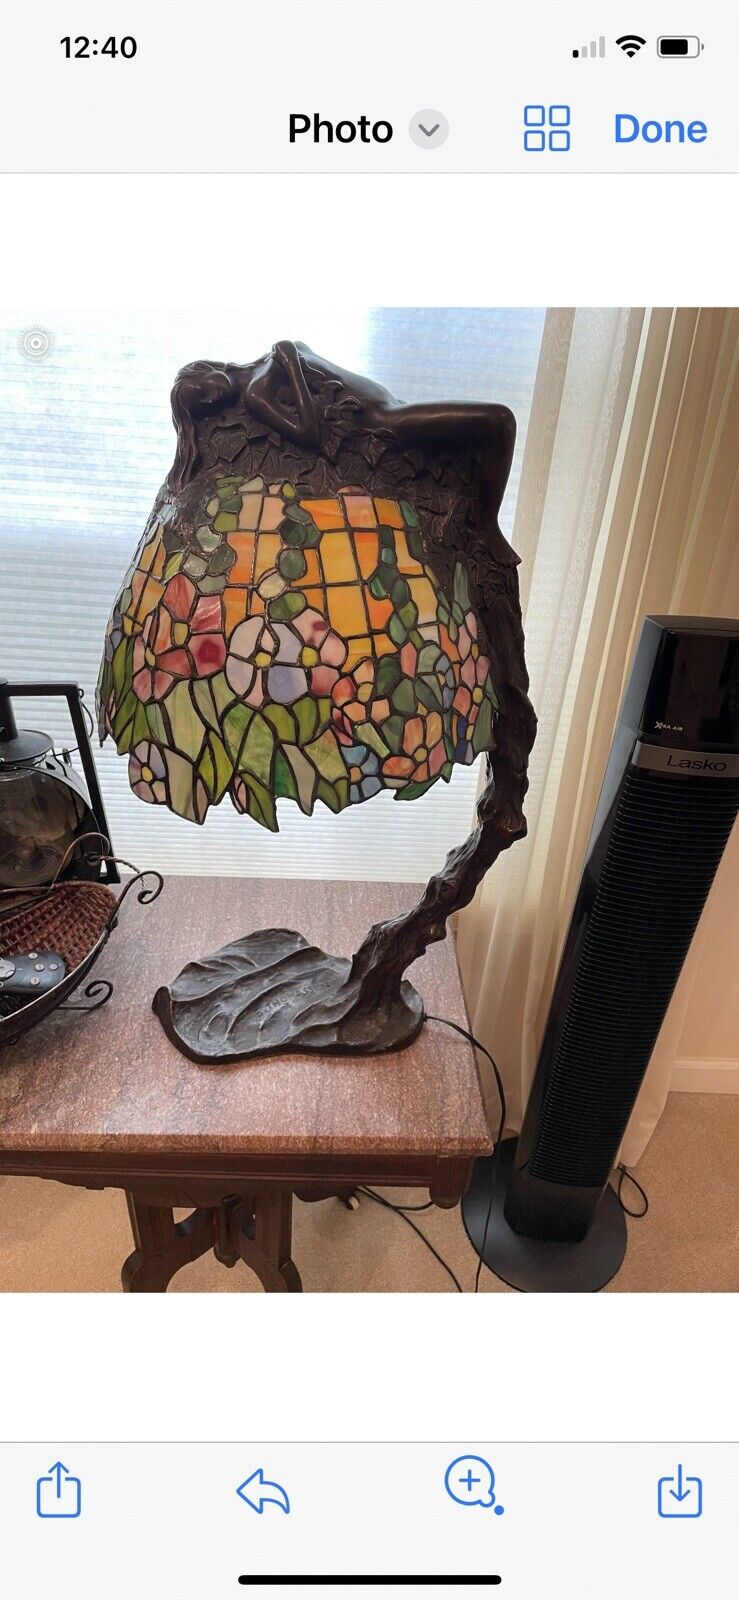 E. Thomasson Bronze Digital Stained Glass Lamp 